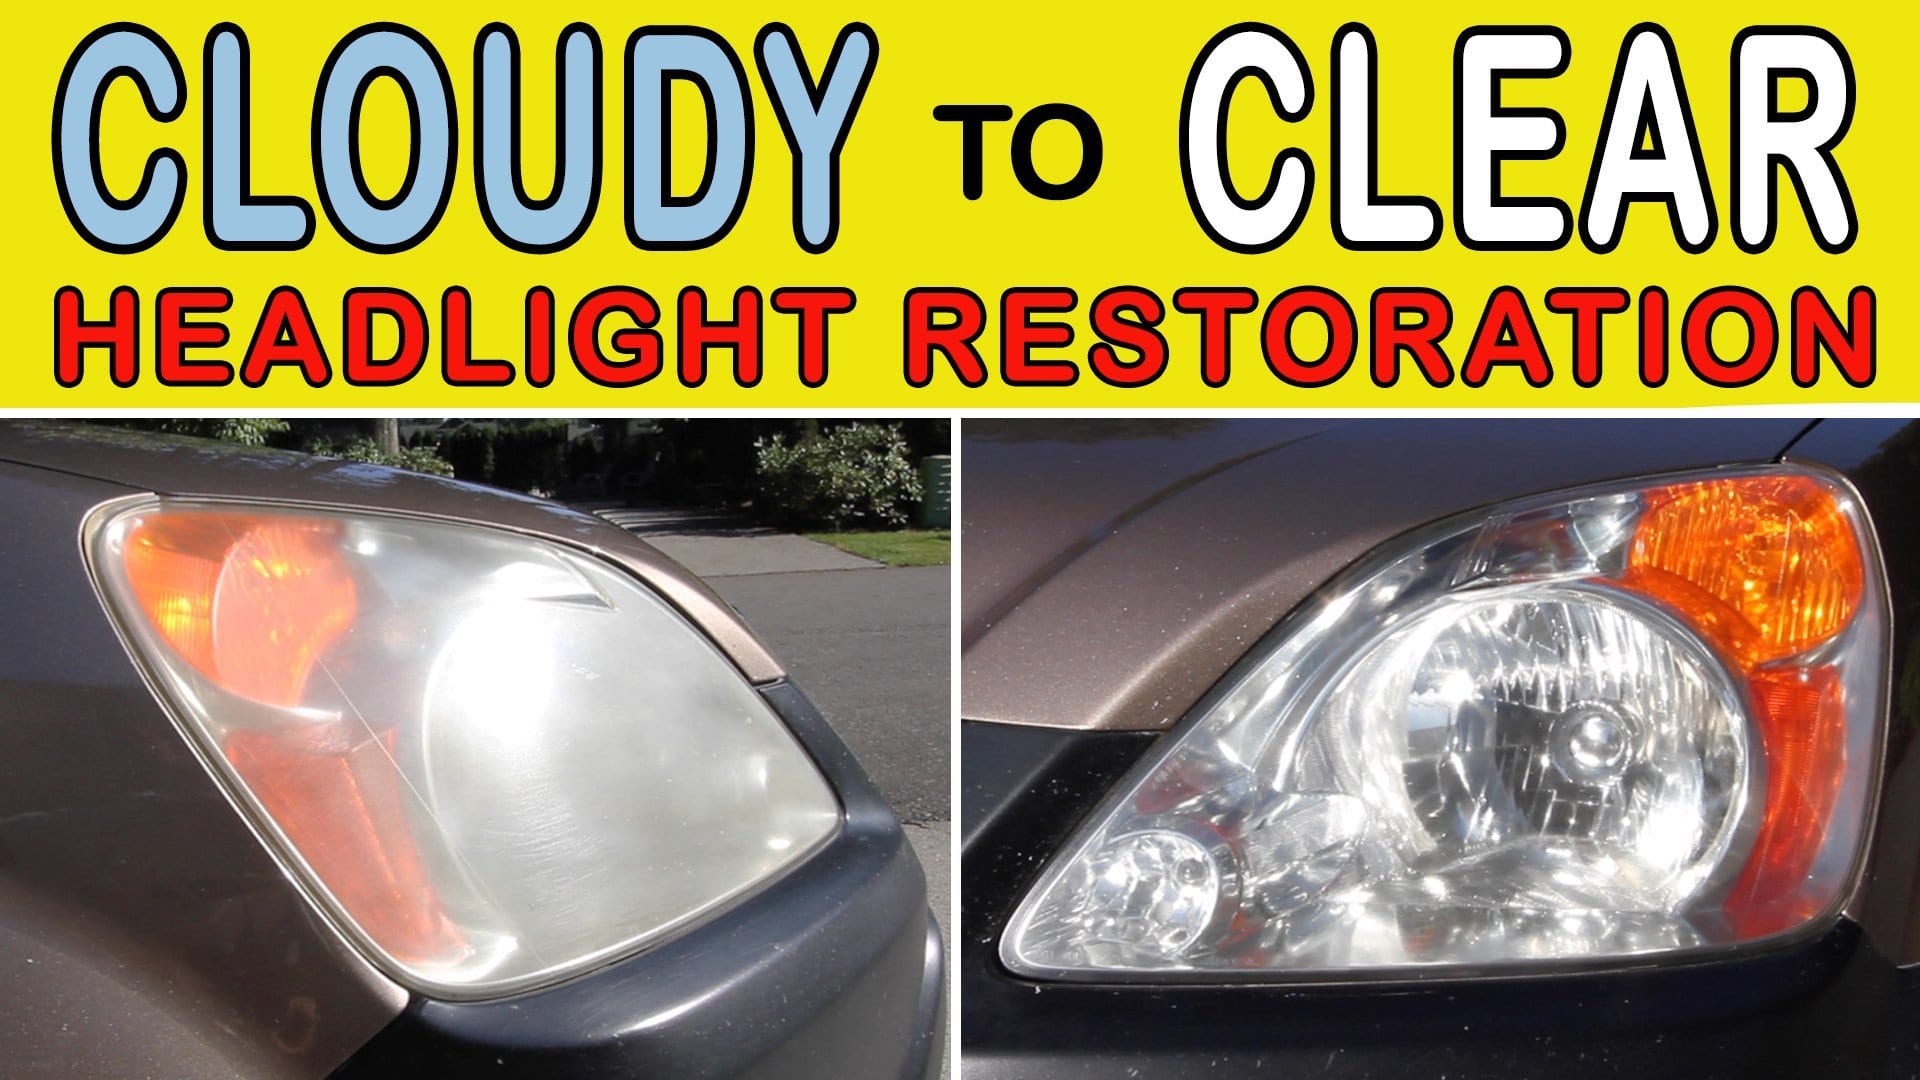 Headlight Restoration: Bringing Clarity to Cloudy Lenses